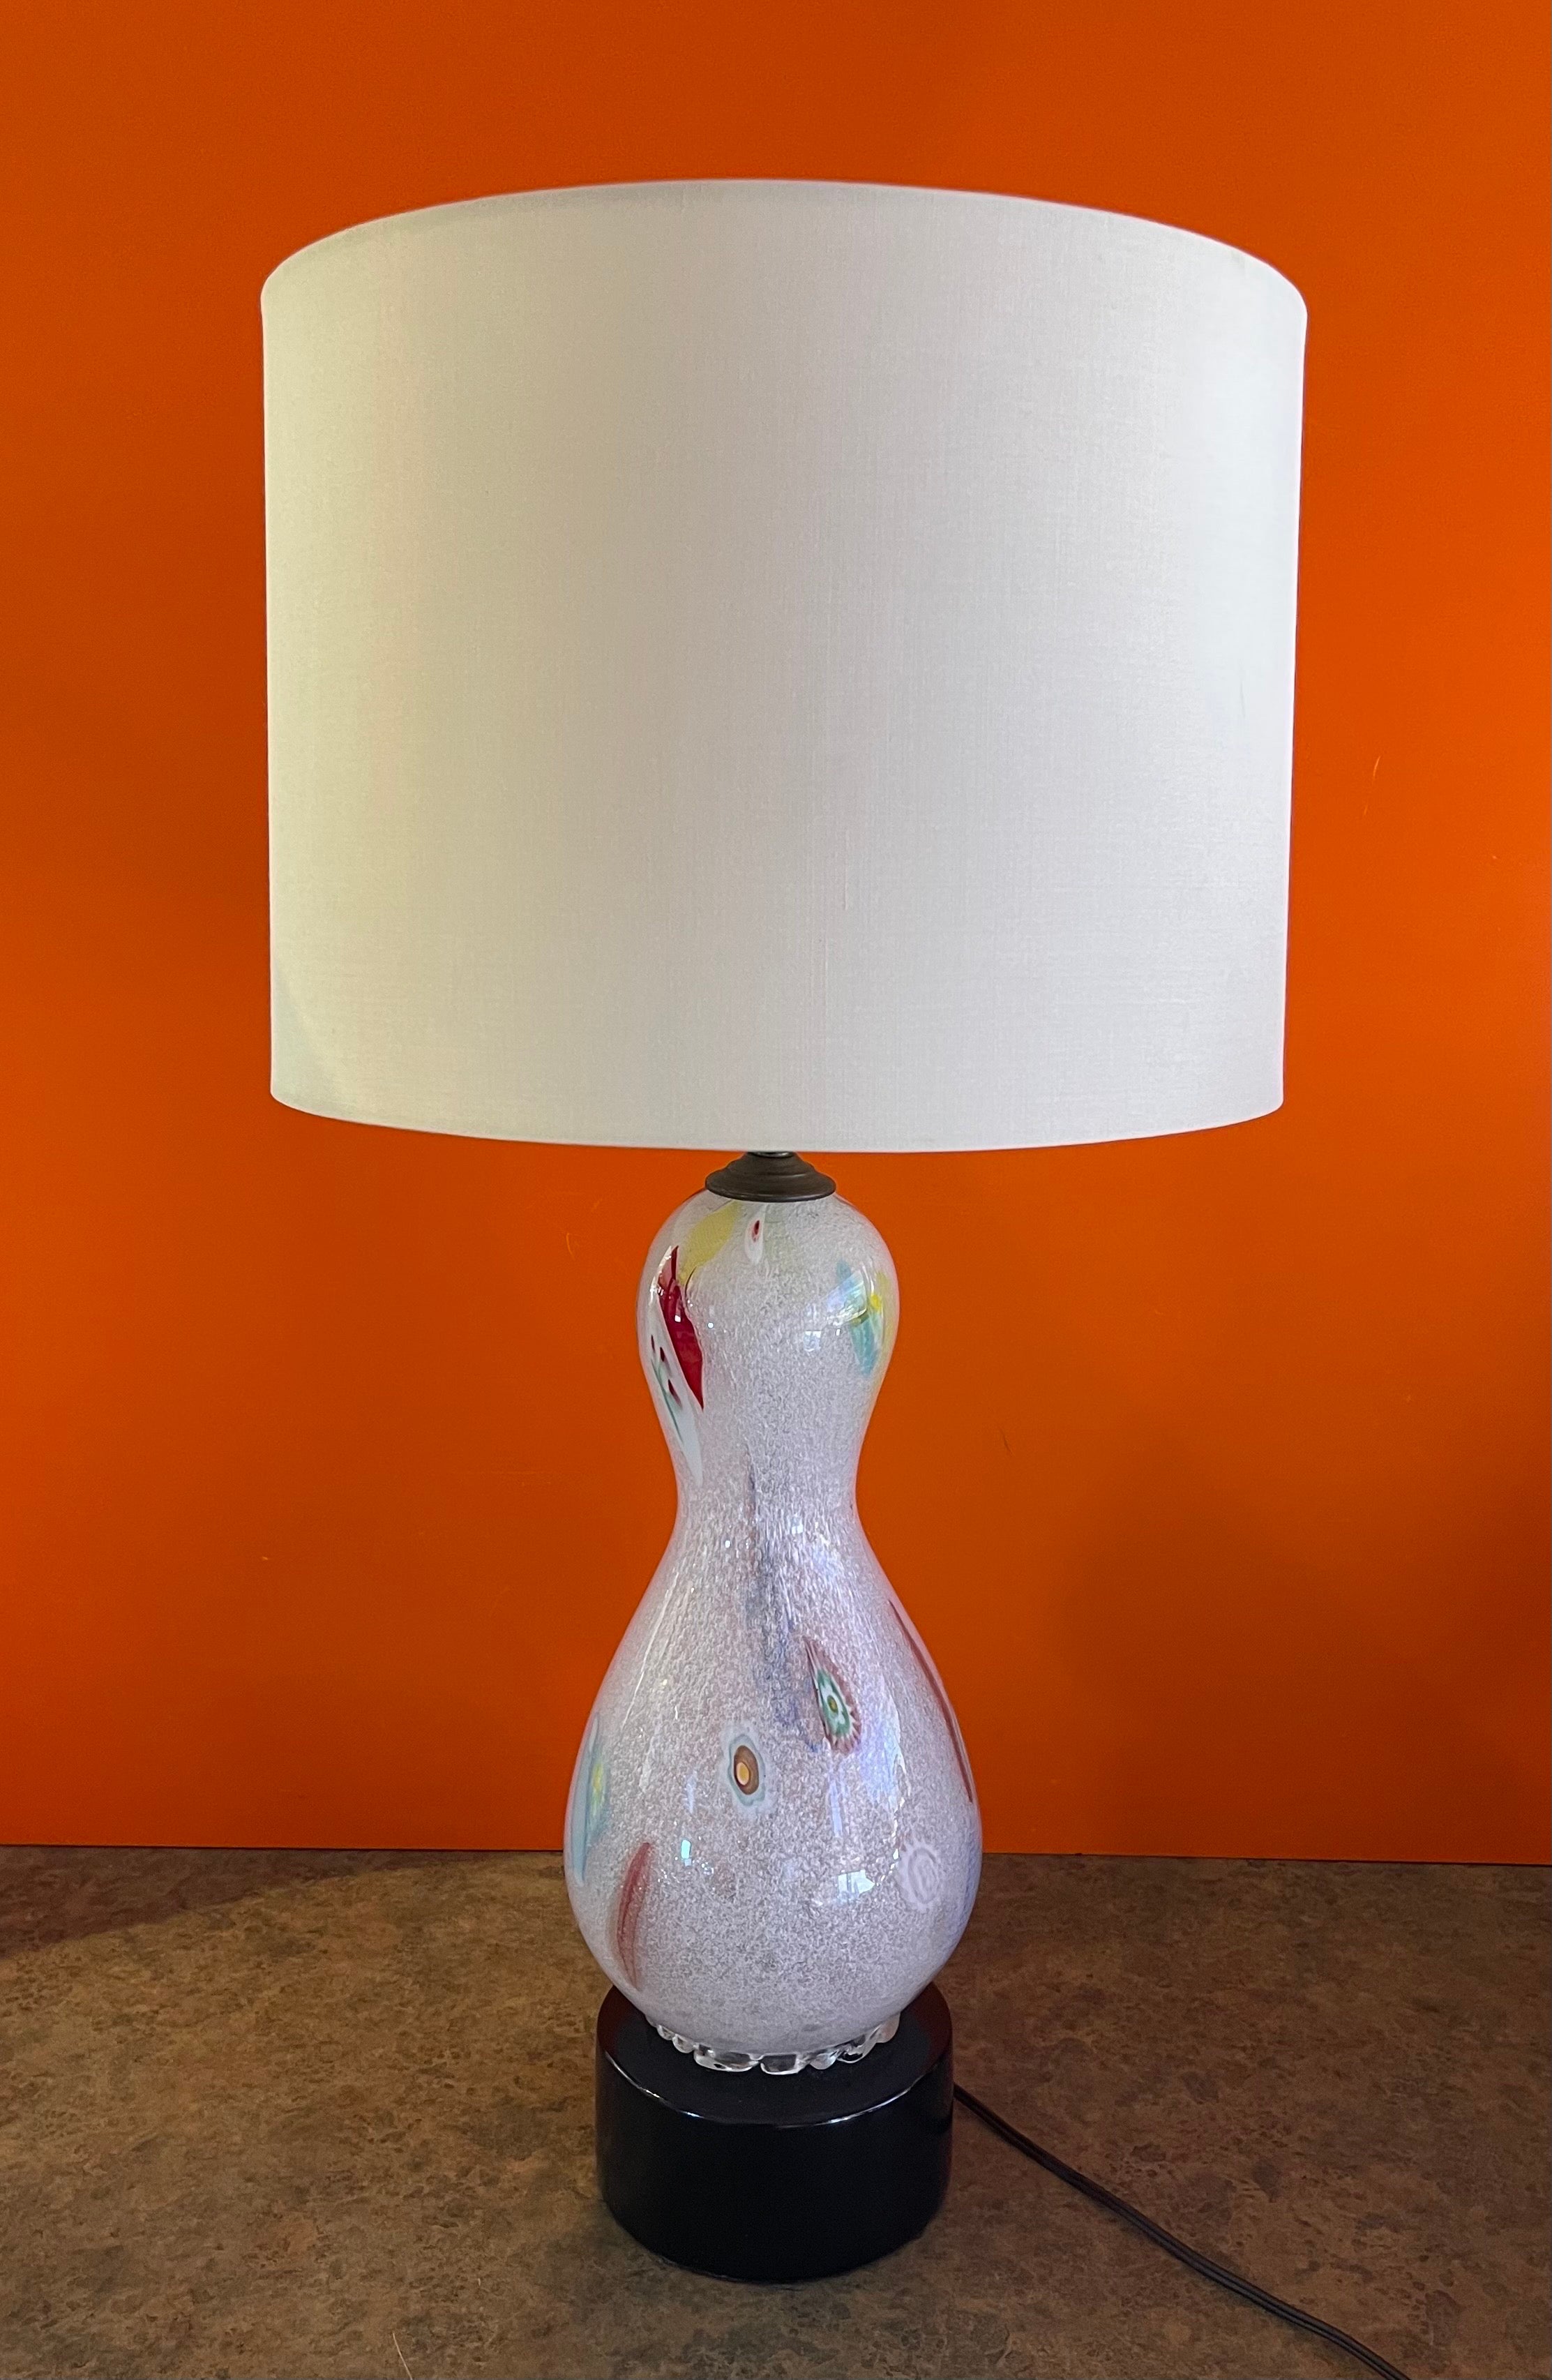 Stunning vintage Murano Glass millefiori table lamp on an ebonite wood base, circa 1950s.  Millefiori is the art glass technique in which colored glass rods are fused and cut to create flower patterns; an ancient technique revived in Venice in the